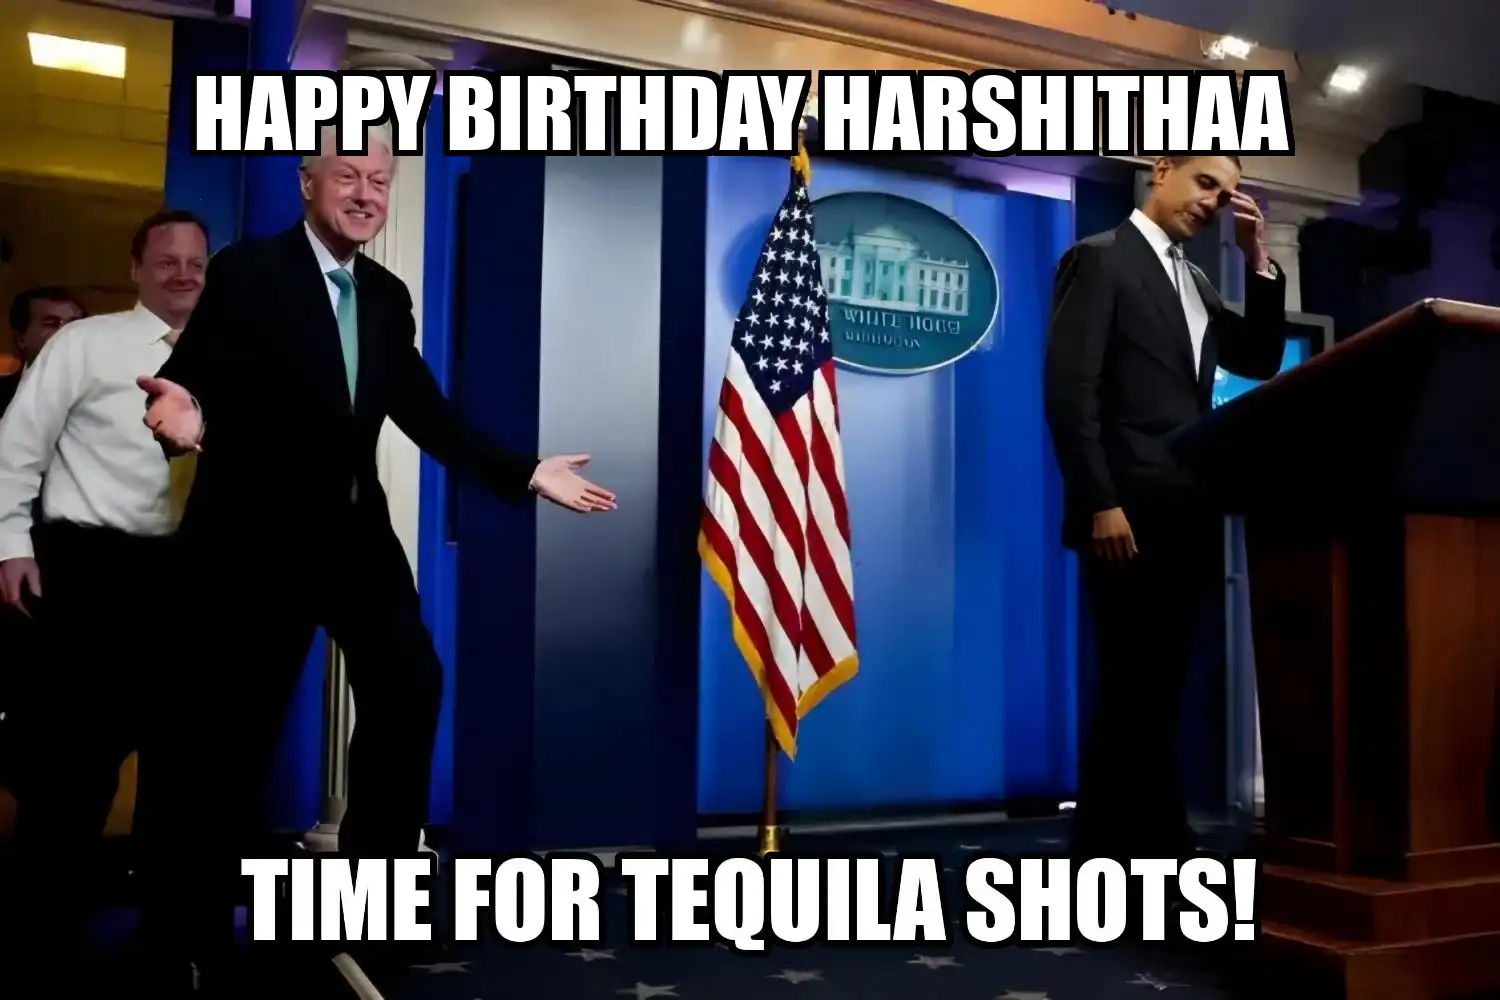 Happy Birthday Harshithaa Time For Tequila Shots Memes